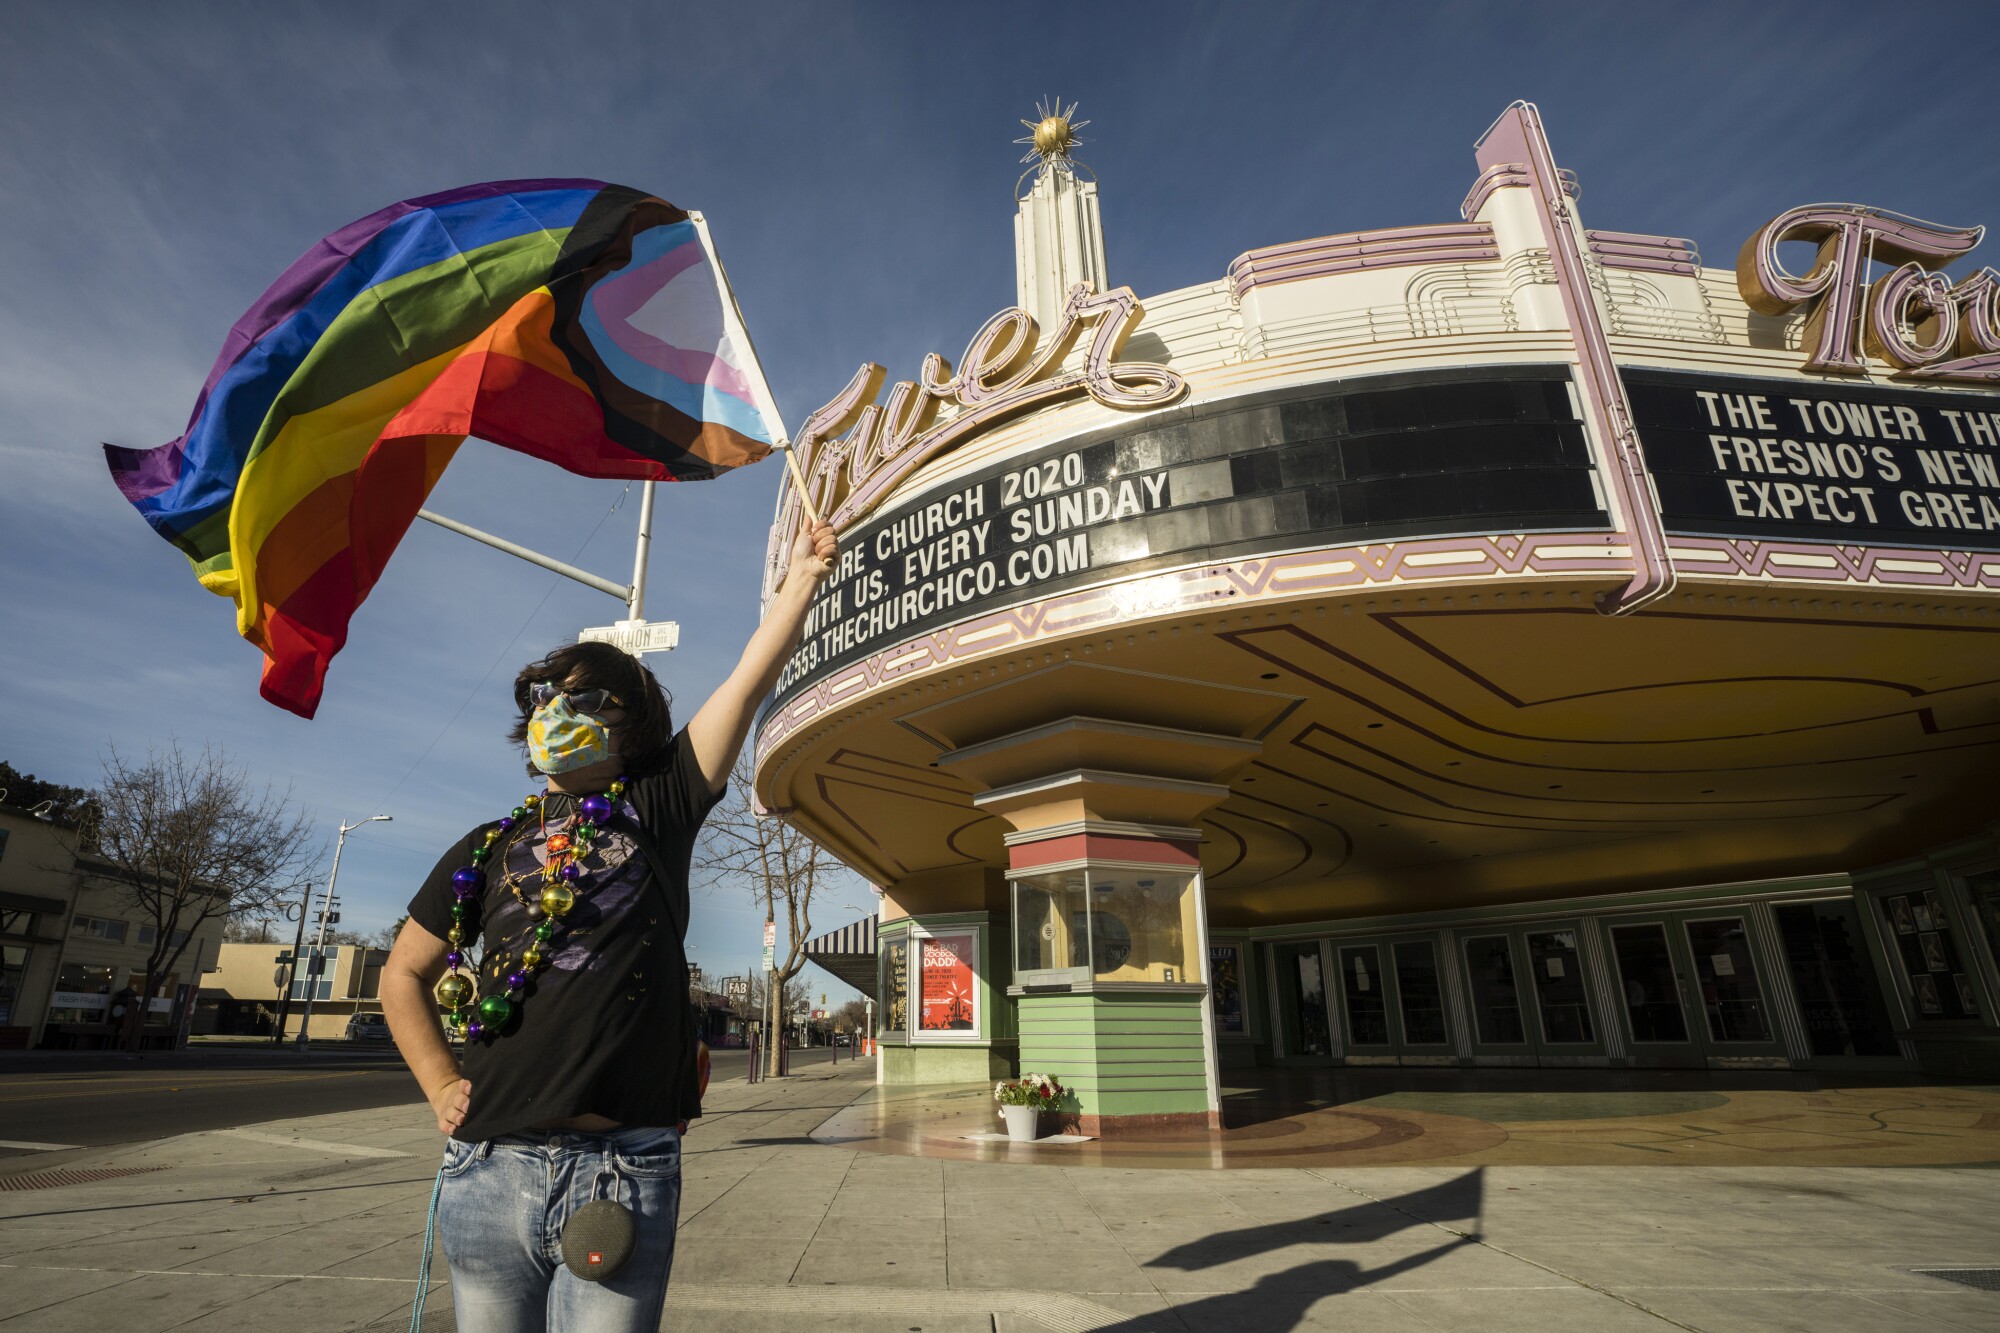 A person in a mask waves a rainbow flag in front of an Art Deco theater